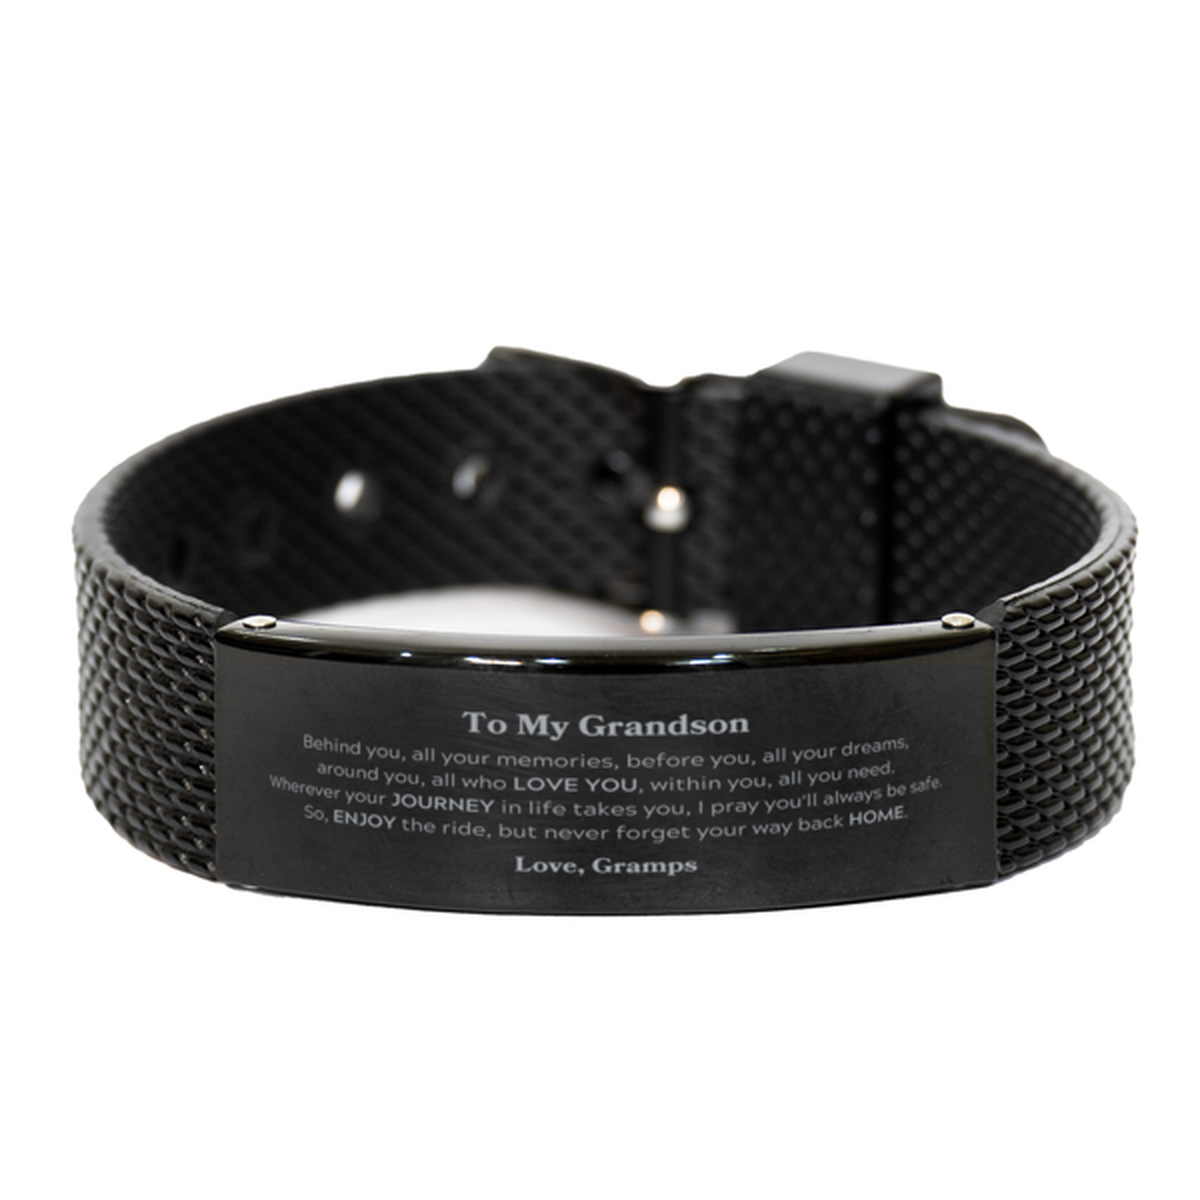 To My Grandson Graduation Gifts from Gramps, Grandson Black Shark Mesh Bracelet Christmas Birthday Gifts for Grandson Behind you, all your memories, before you, all your dreams. Love, Gramps